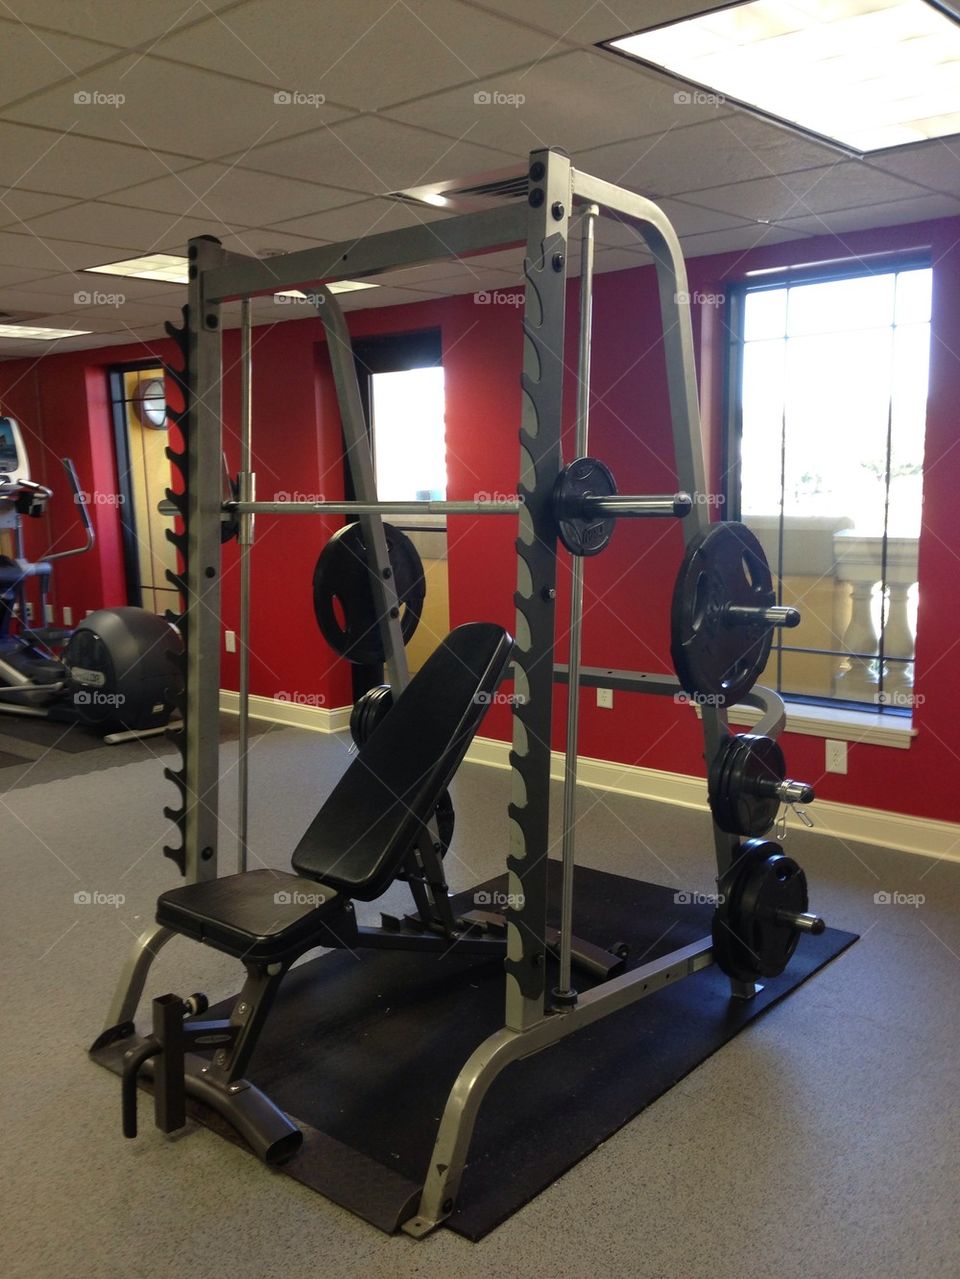 Weight bench station